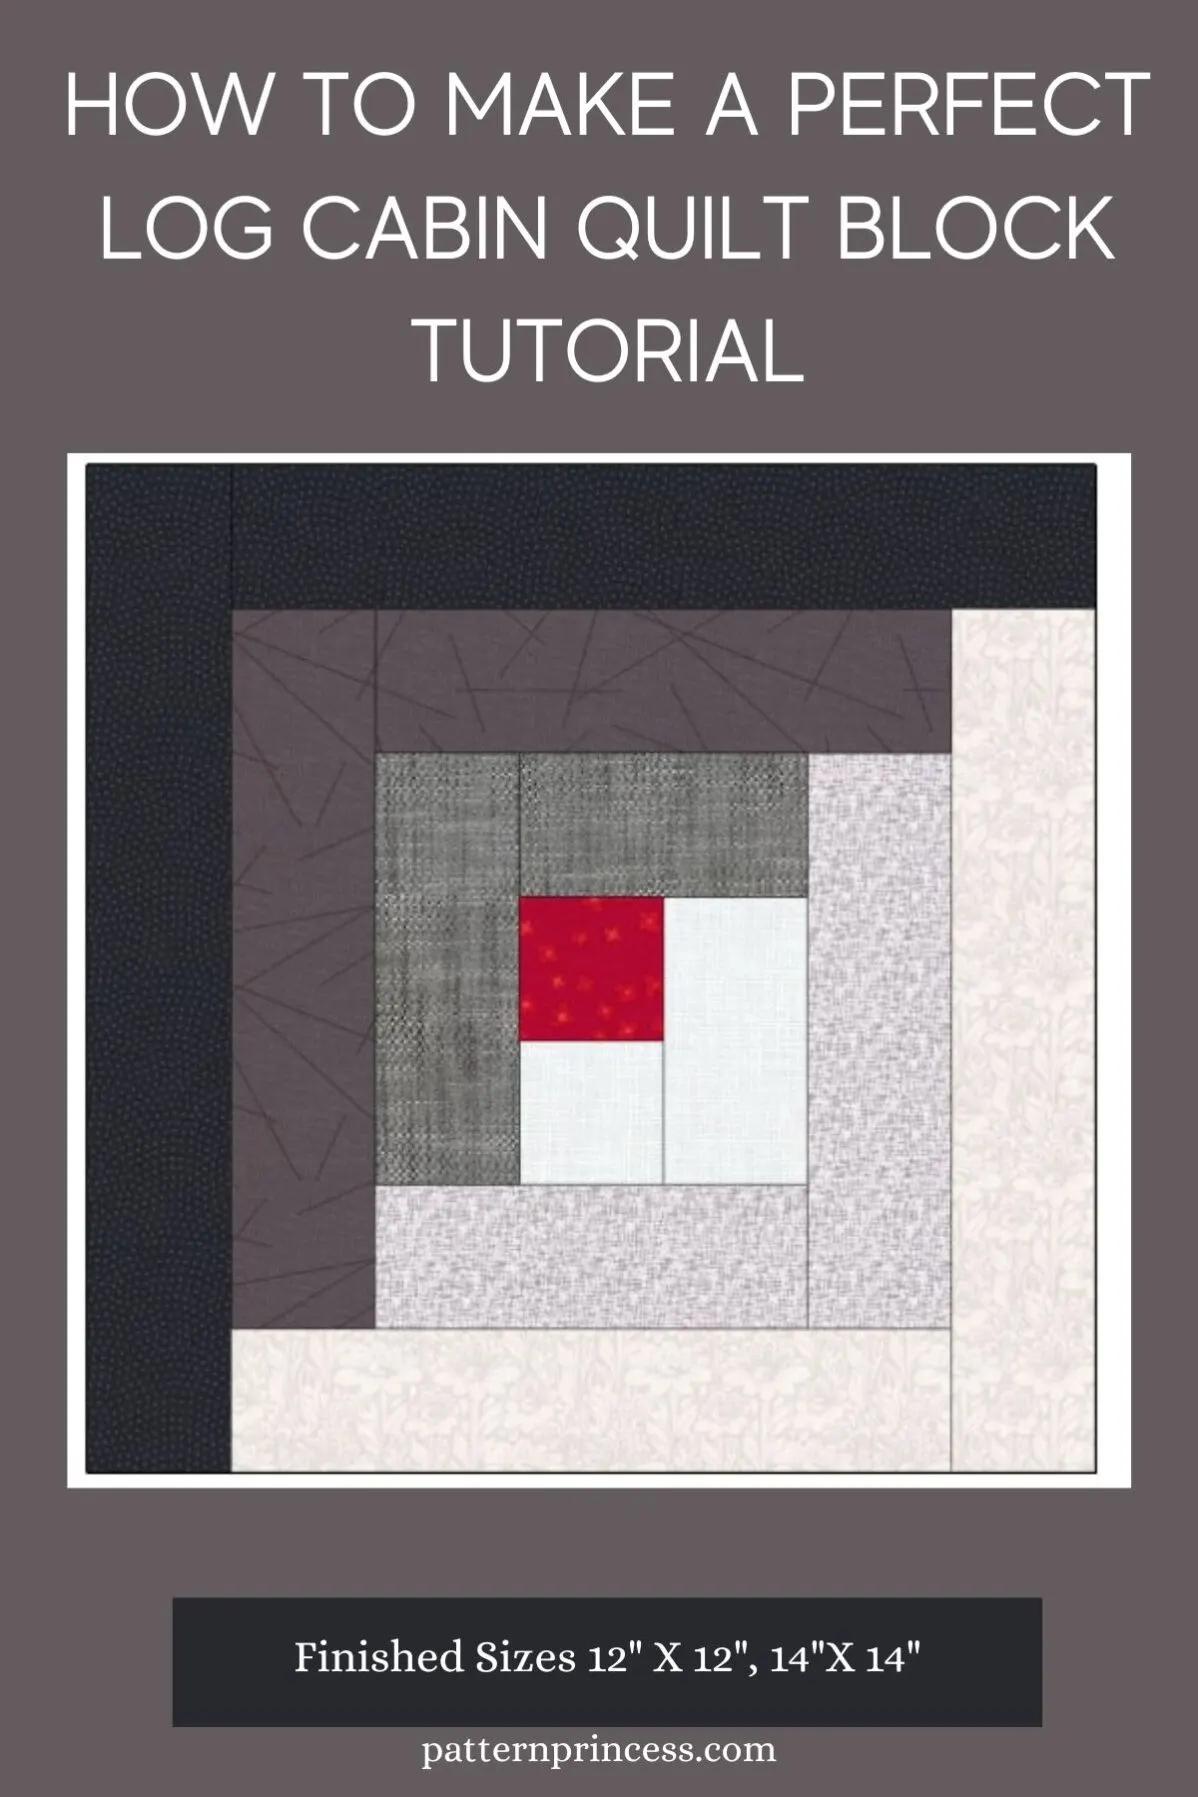 How to Make a Perfect Log Cabin Quilt Block Tutorial